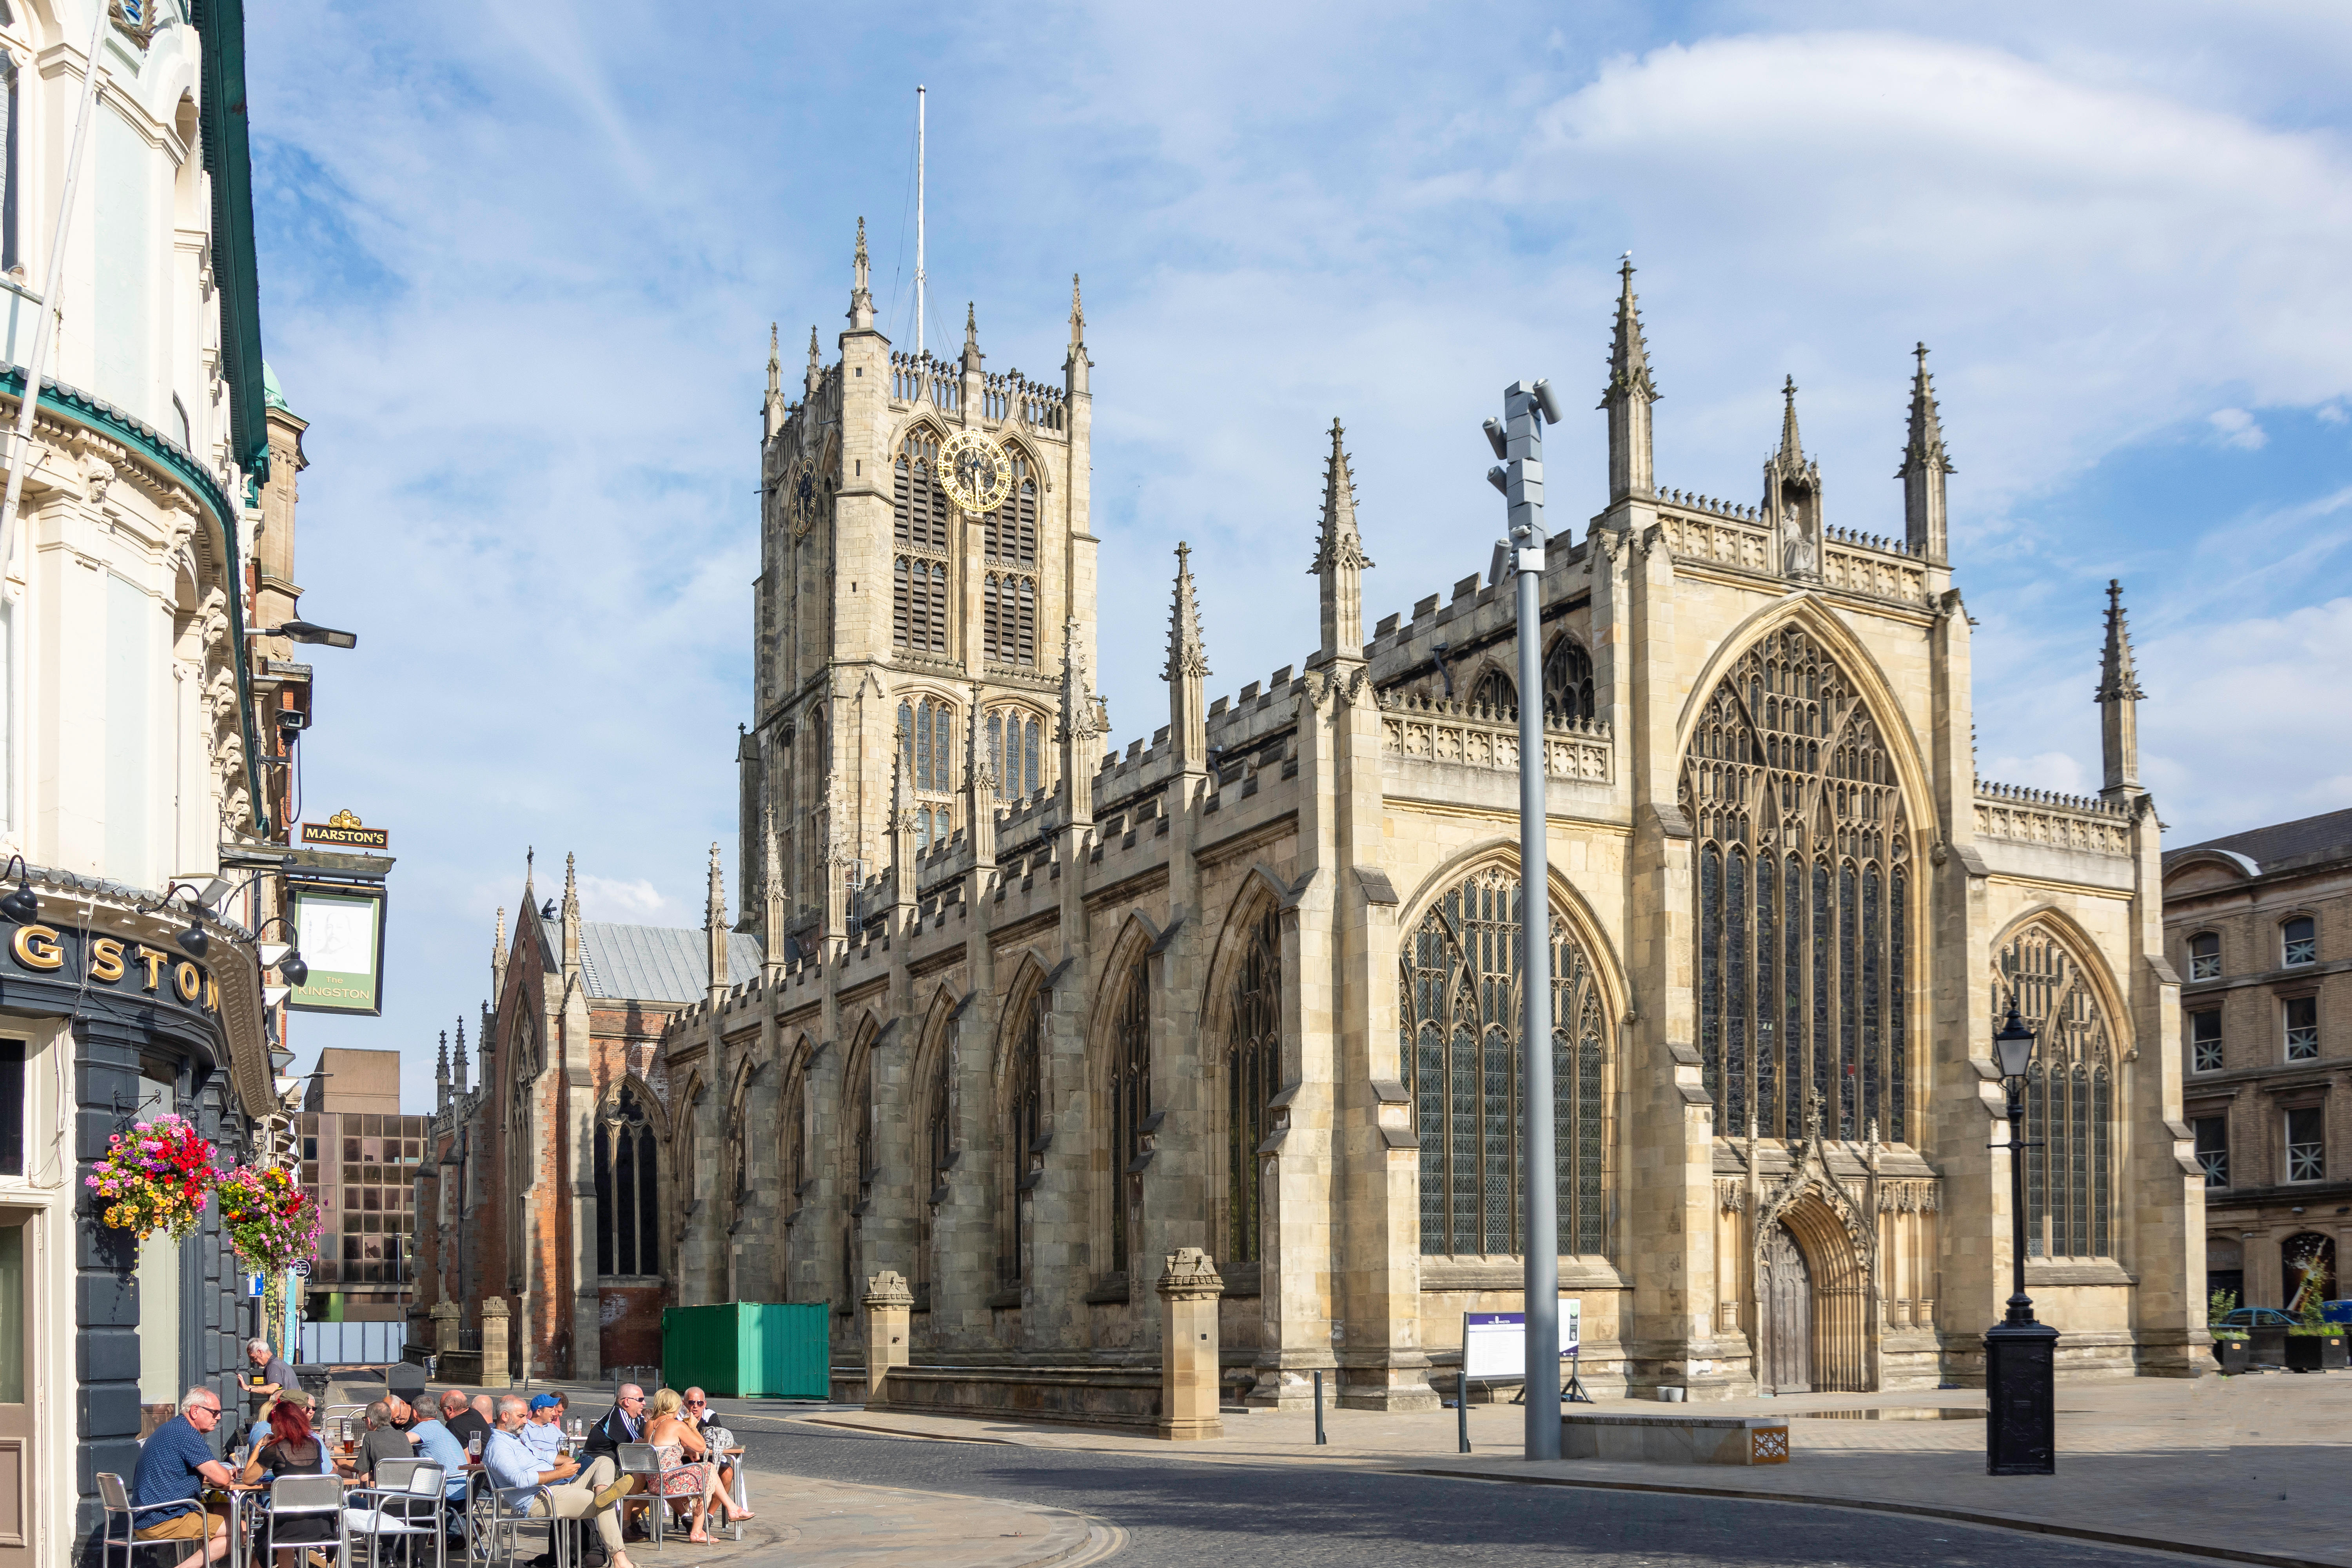 Built more than 700 years ago, Hull Minster was England’s largest parish church until recently